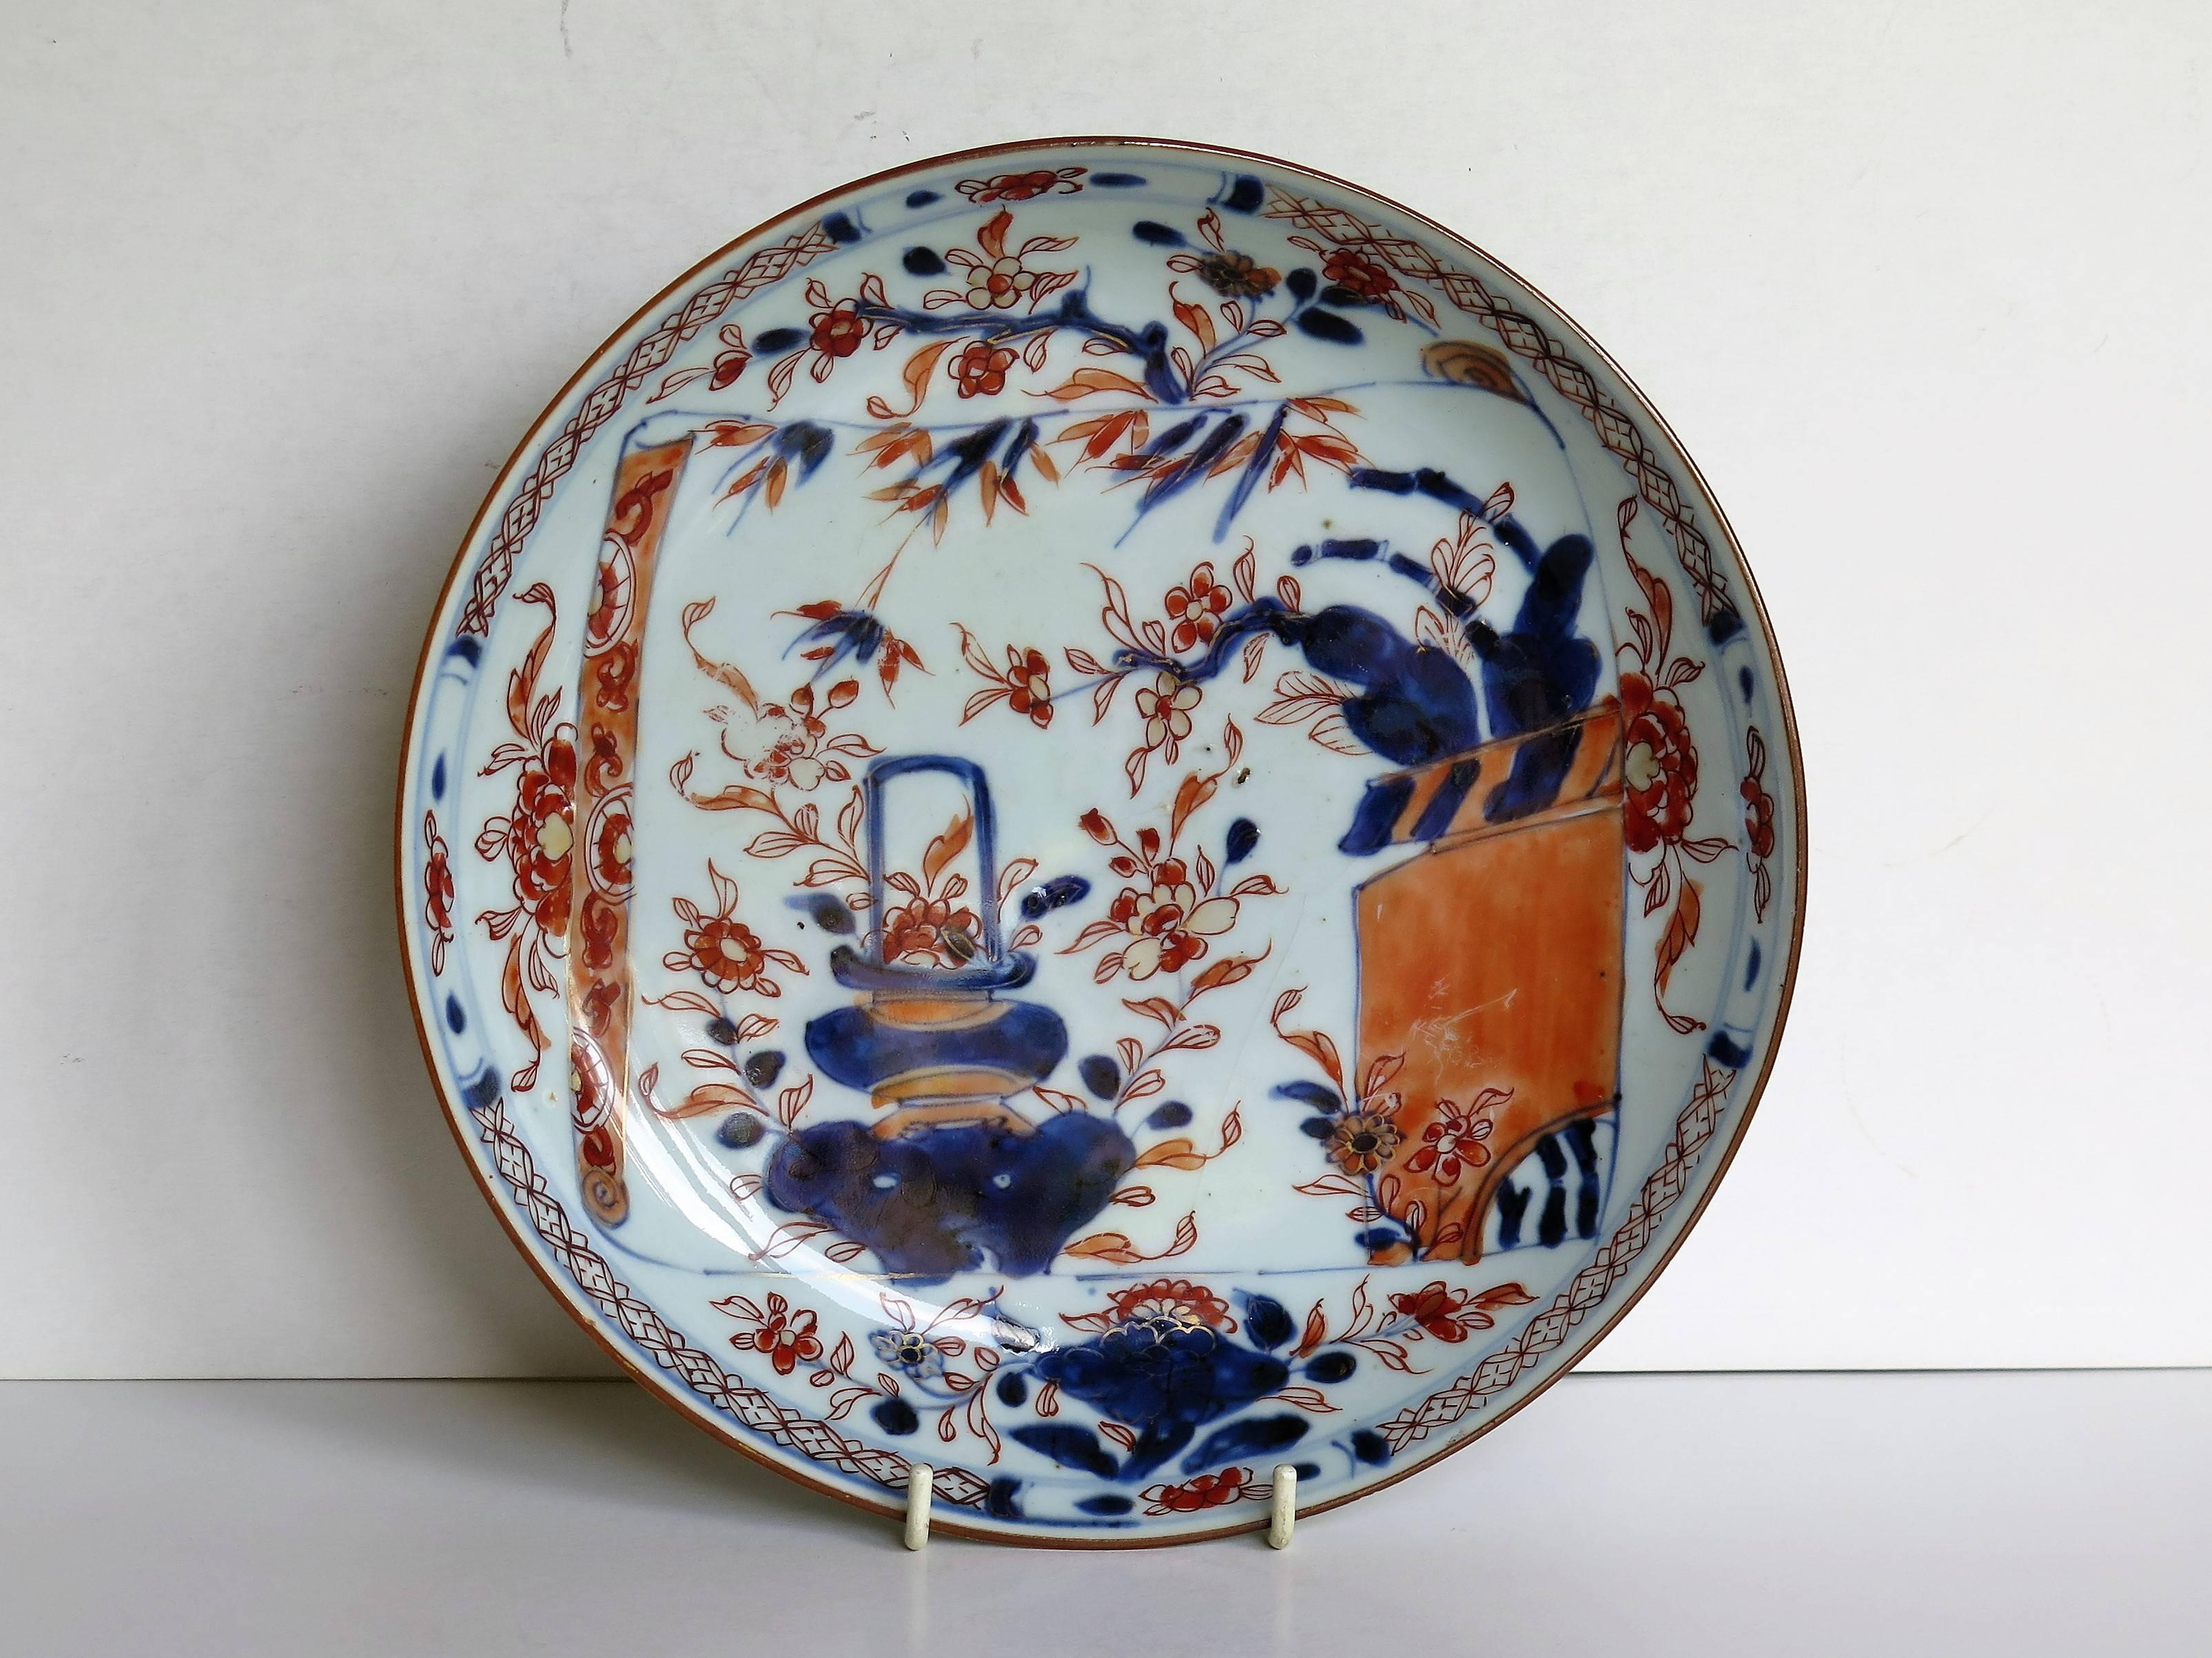 This is a fine hand-painted Chinese porcelain dish or plate with a deep well, dating to the very early 18th century, Qing Kangxi dynasty, circa 1710.

The glaze is thin and glassy with a soft light bluish tinge. The foot rim is fairly deep and